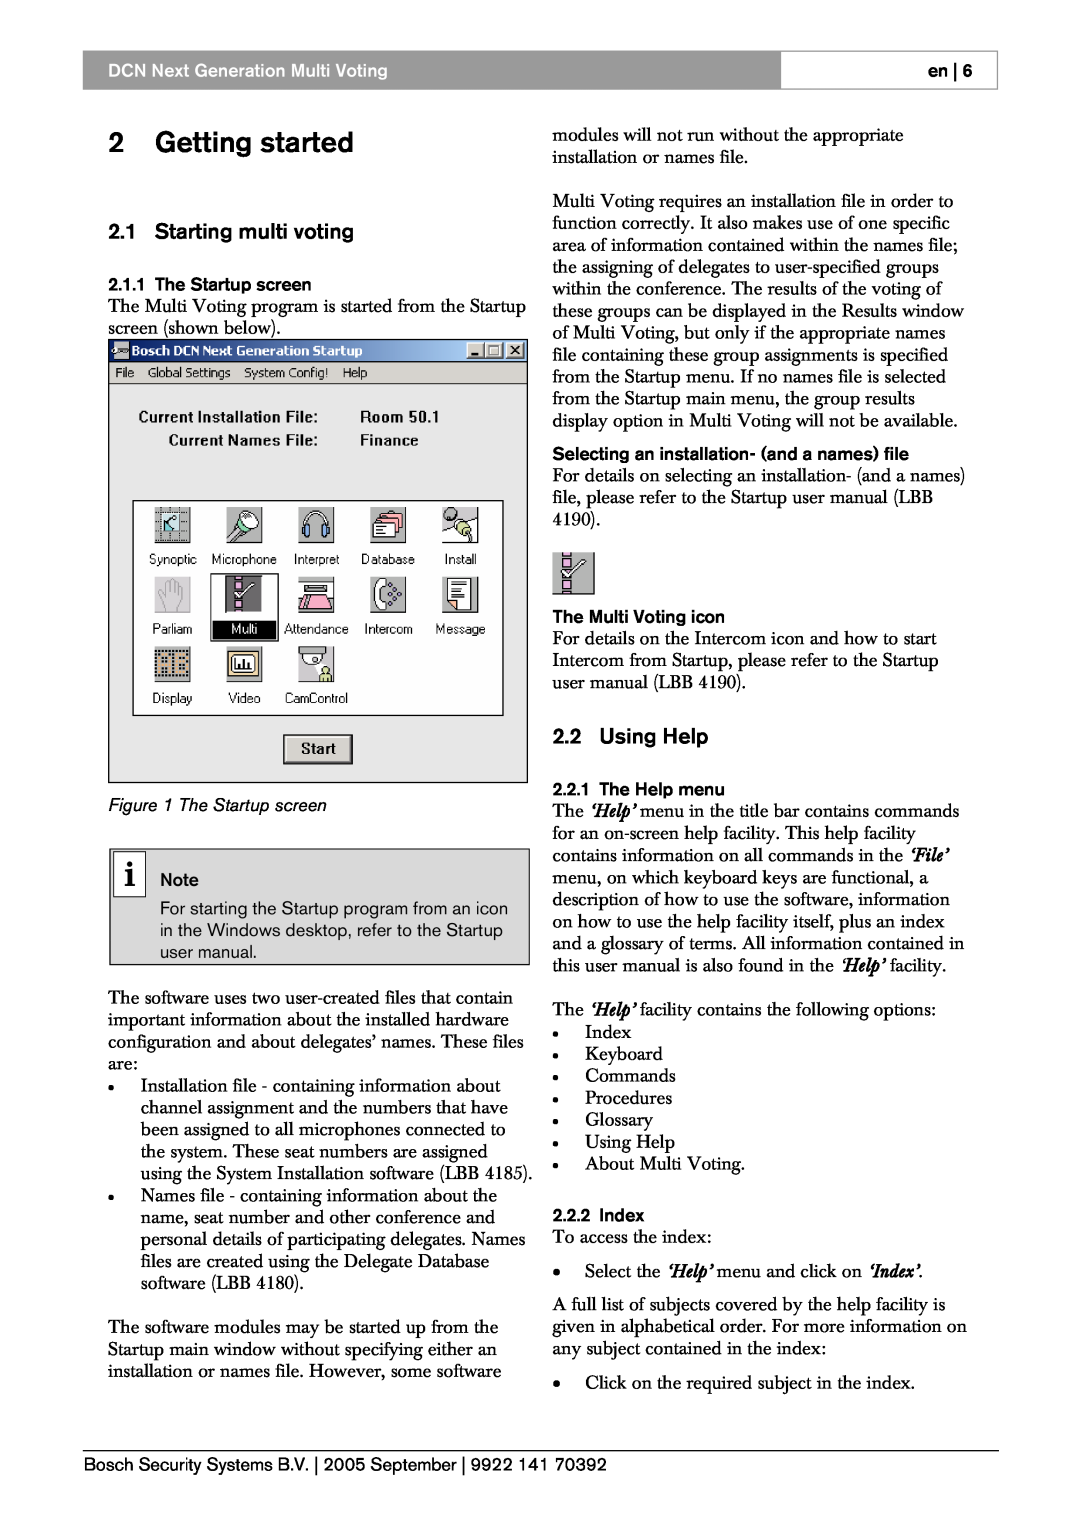 Bosch Appliances LBB 4176 user manual 2Getting started, Starting multi voting, Using Help, The Startup screen 